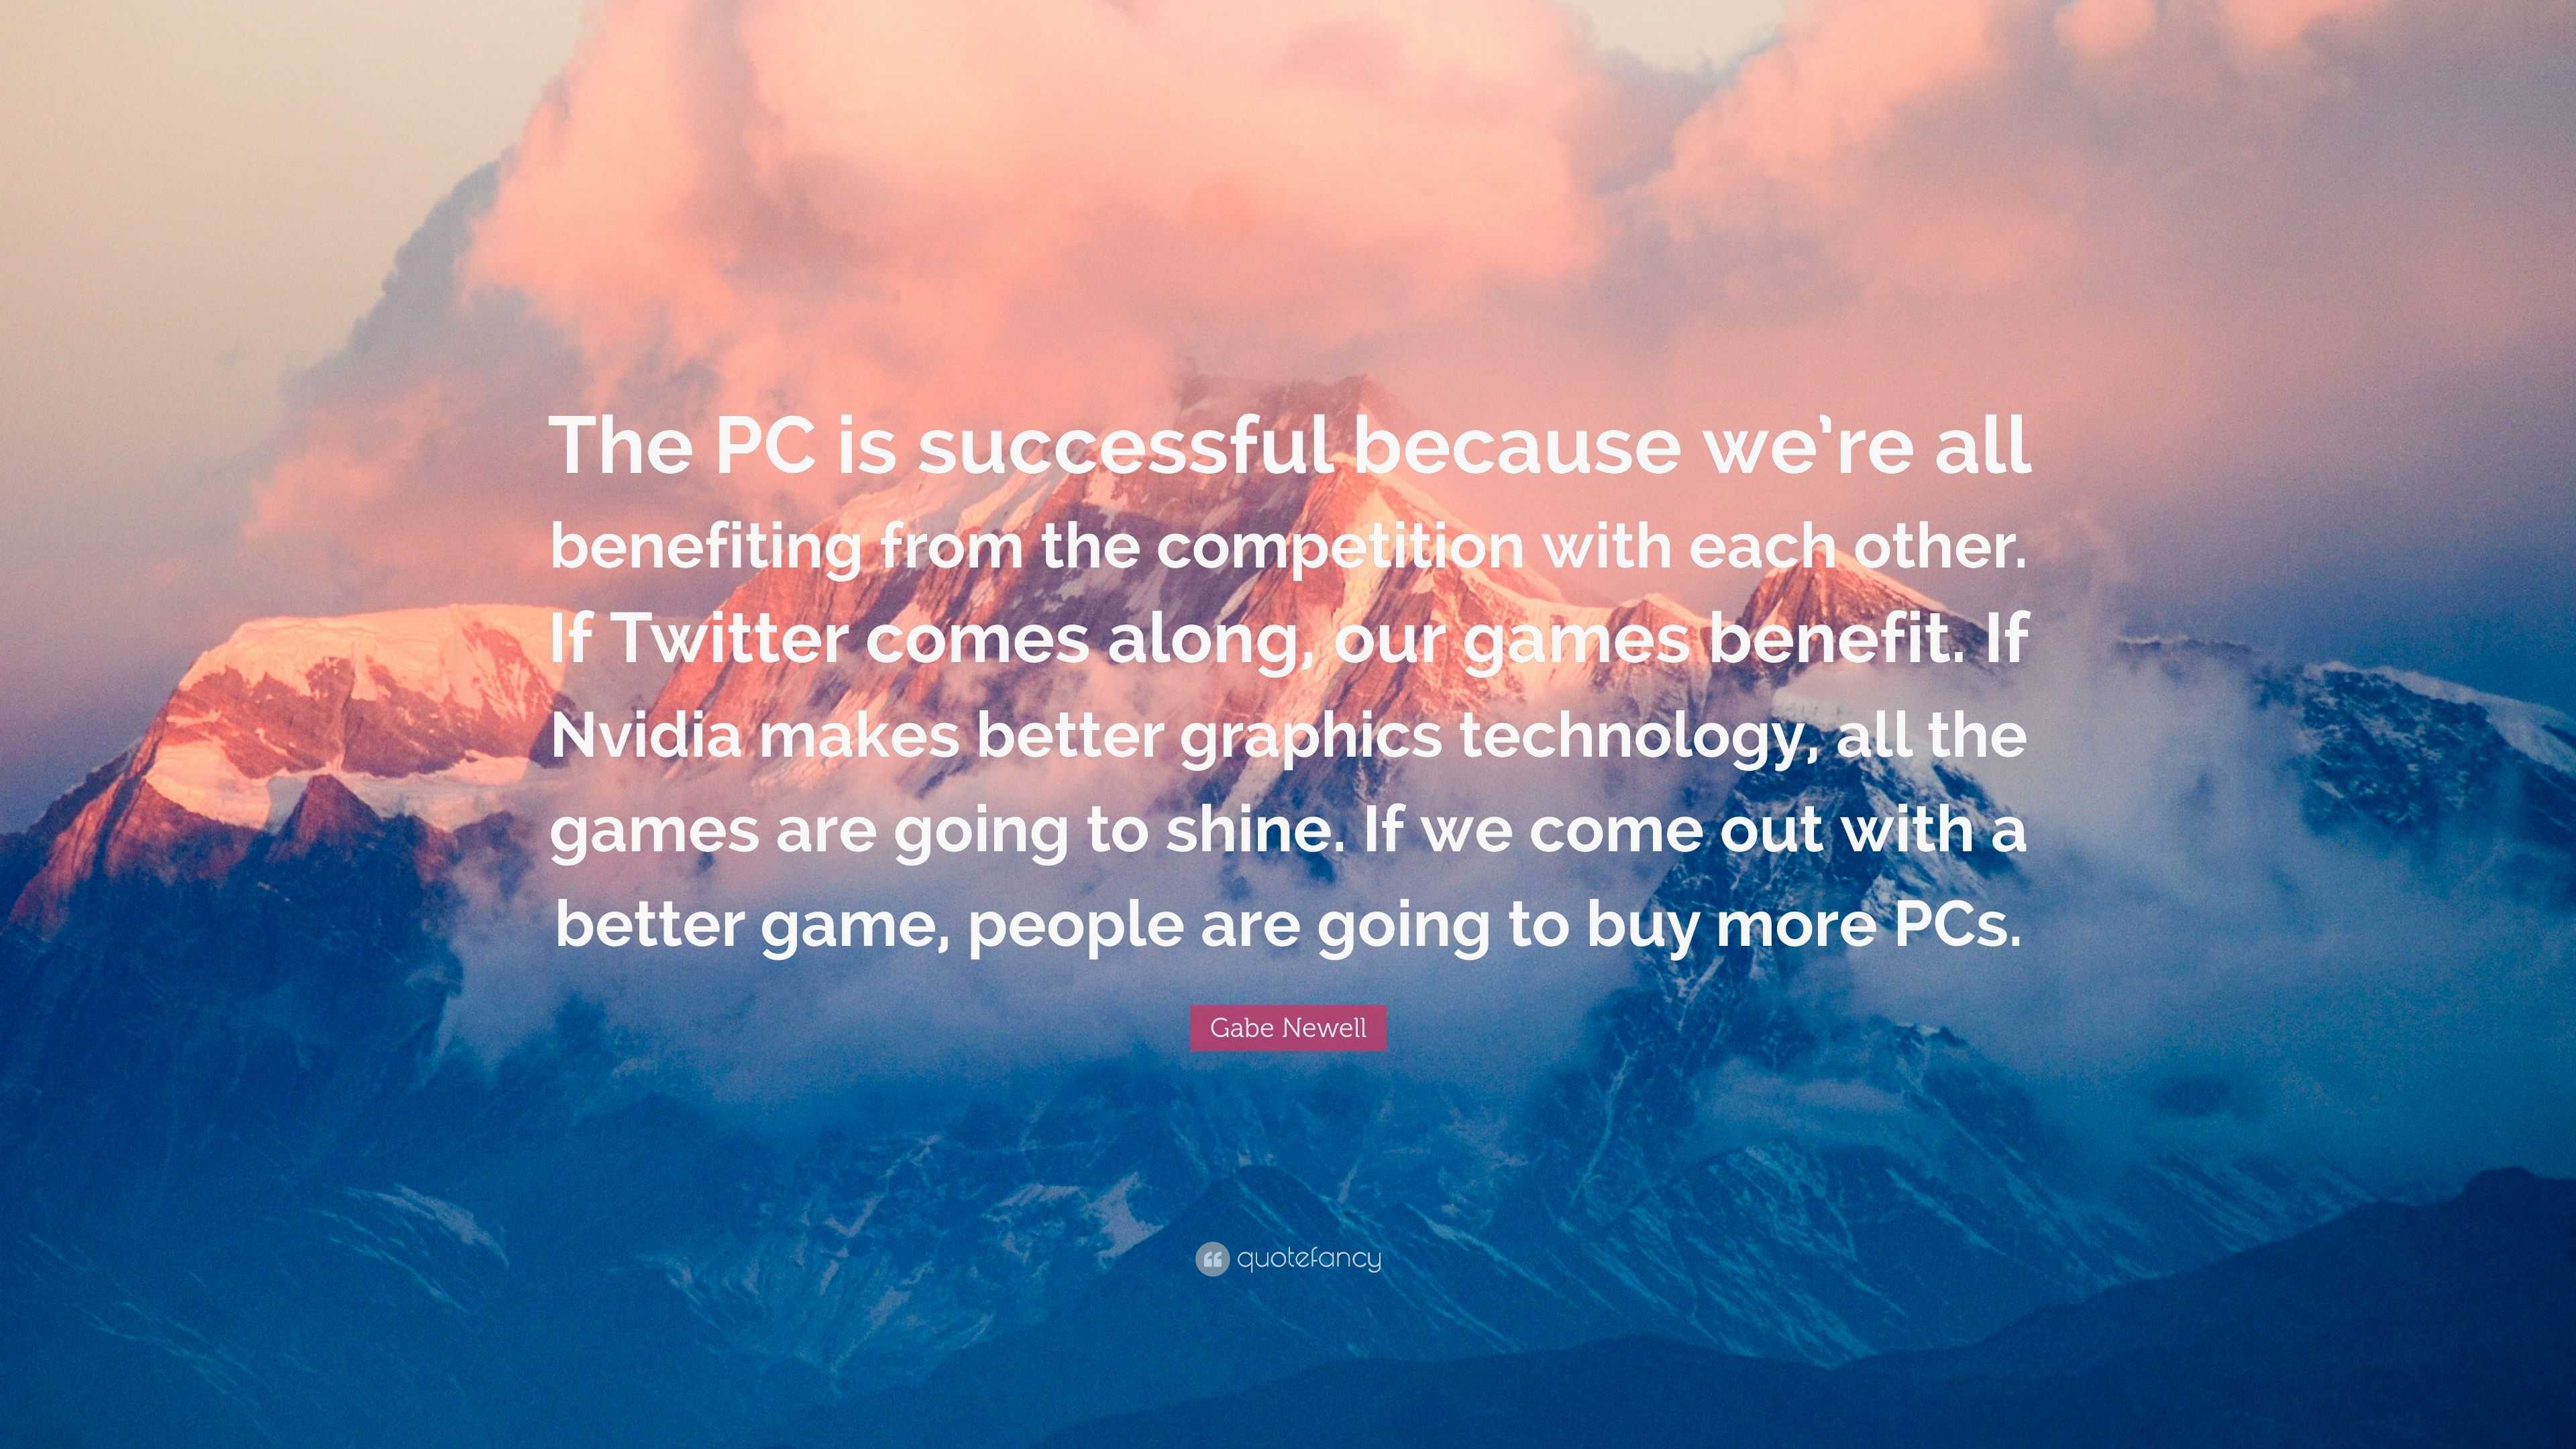 Gabe Newell Quote: “The PC is successful because we're all benefiting from  the competition with each other. If Twitter comes along, our game”